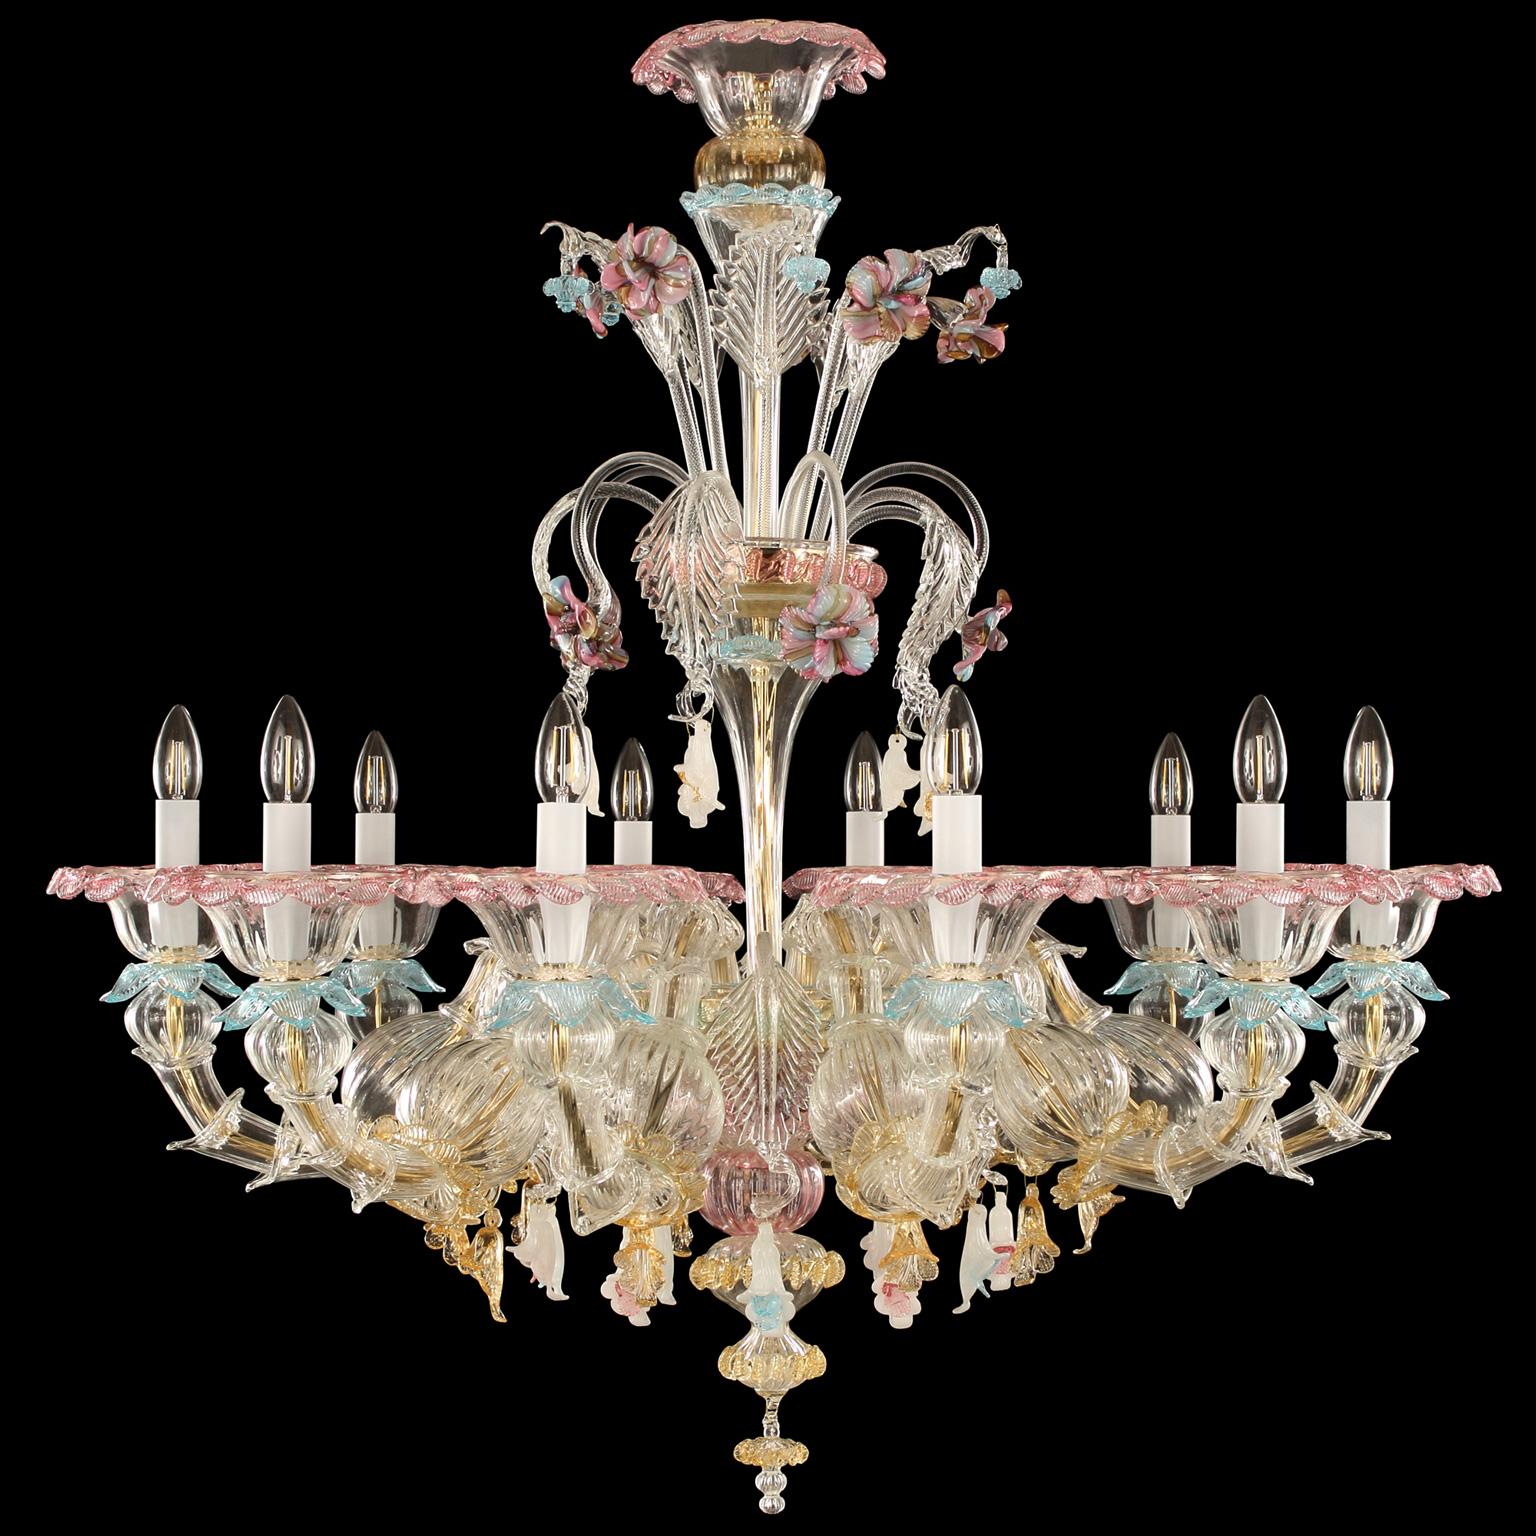 Toffee chandelier 10 arms, semi-rezzonico style, clear crystal Murano glass, multi-color details by Multiforme.

The artistic glass chandelier toffee is an elegant and delicate lighting work, colored with pastel tones. The structure is a